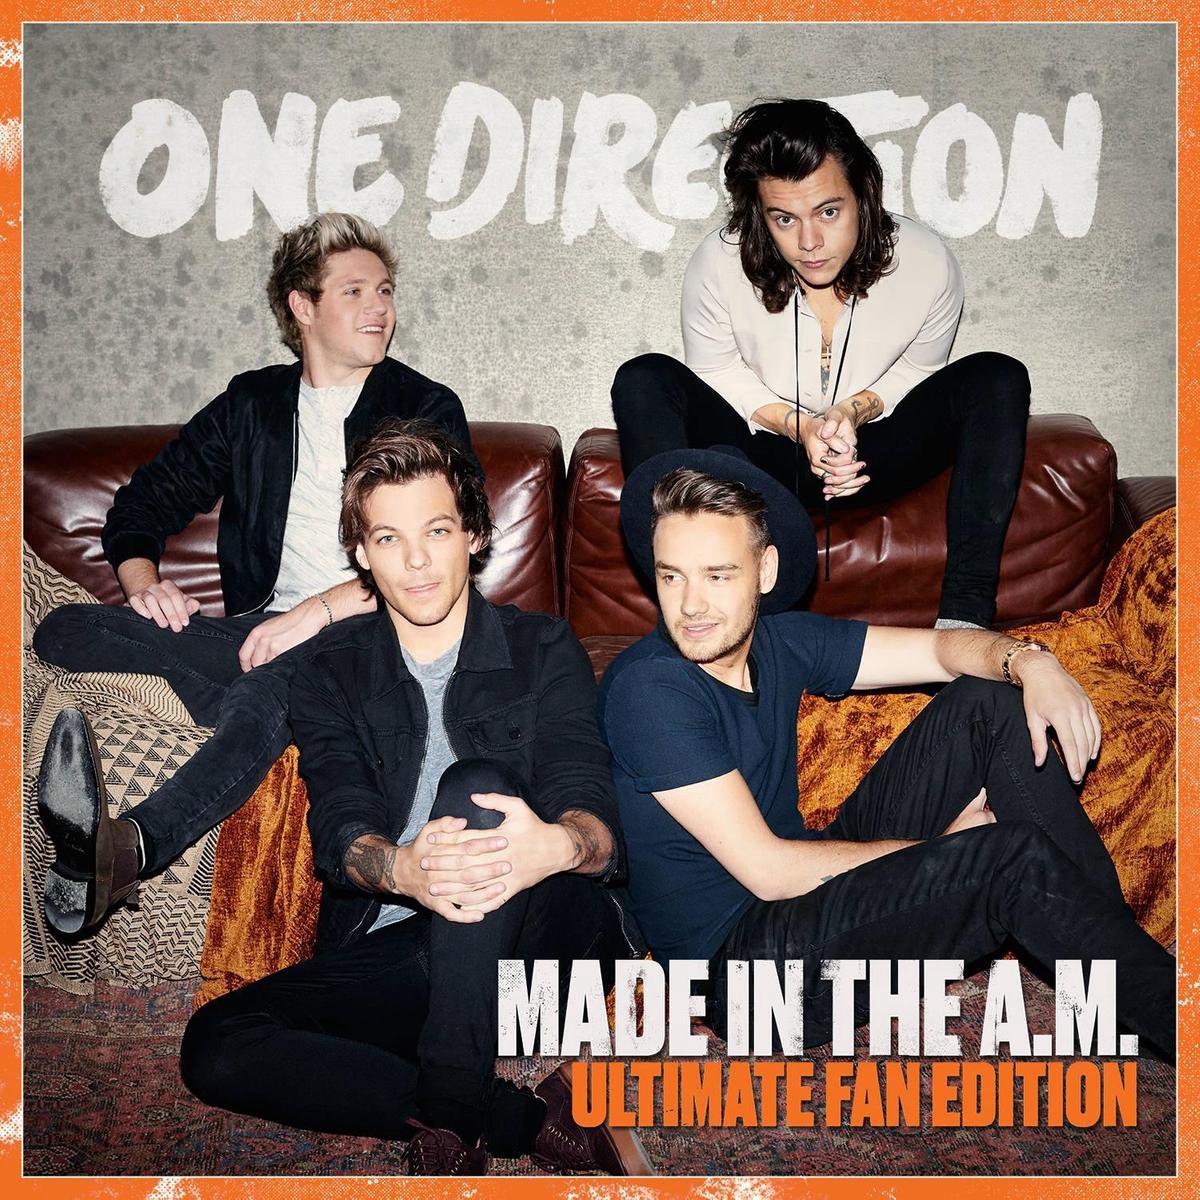 Made In The A.M.  (Ultimate Fan Edition) - One Direction